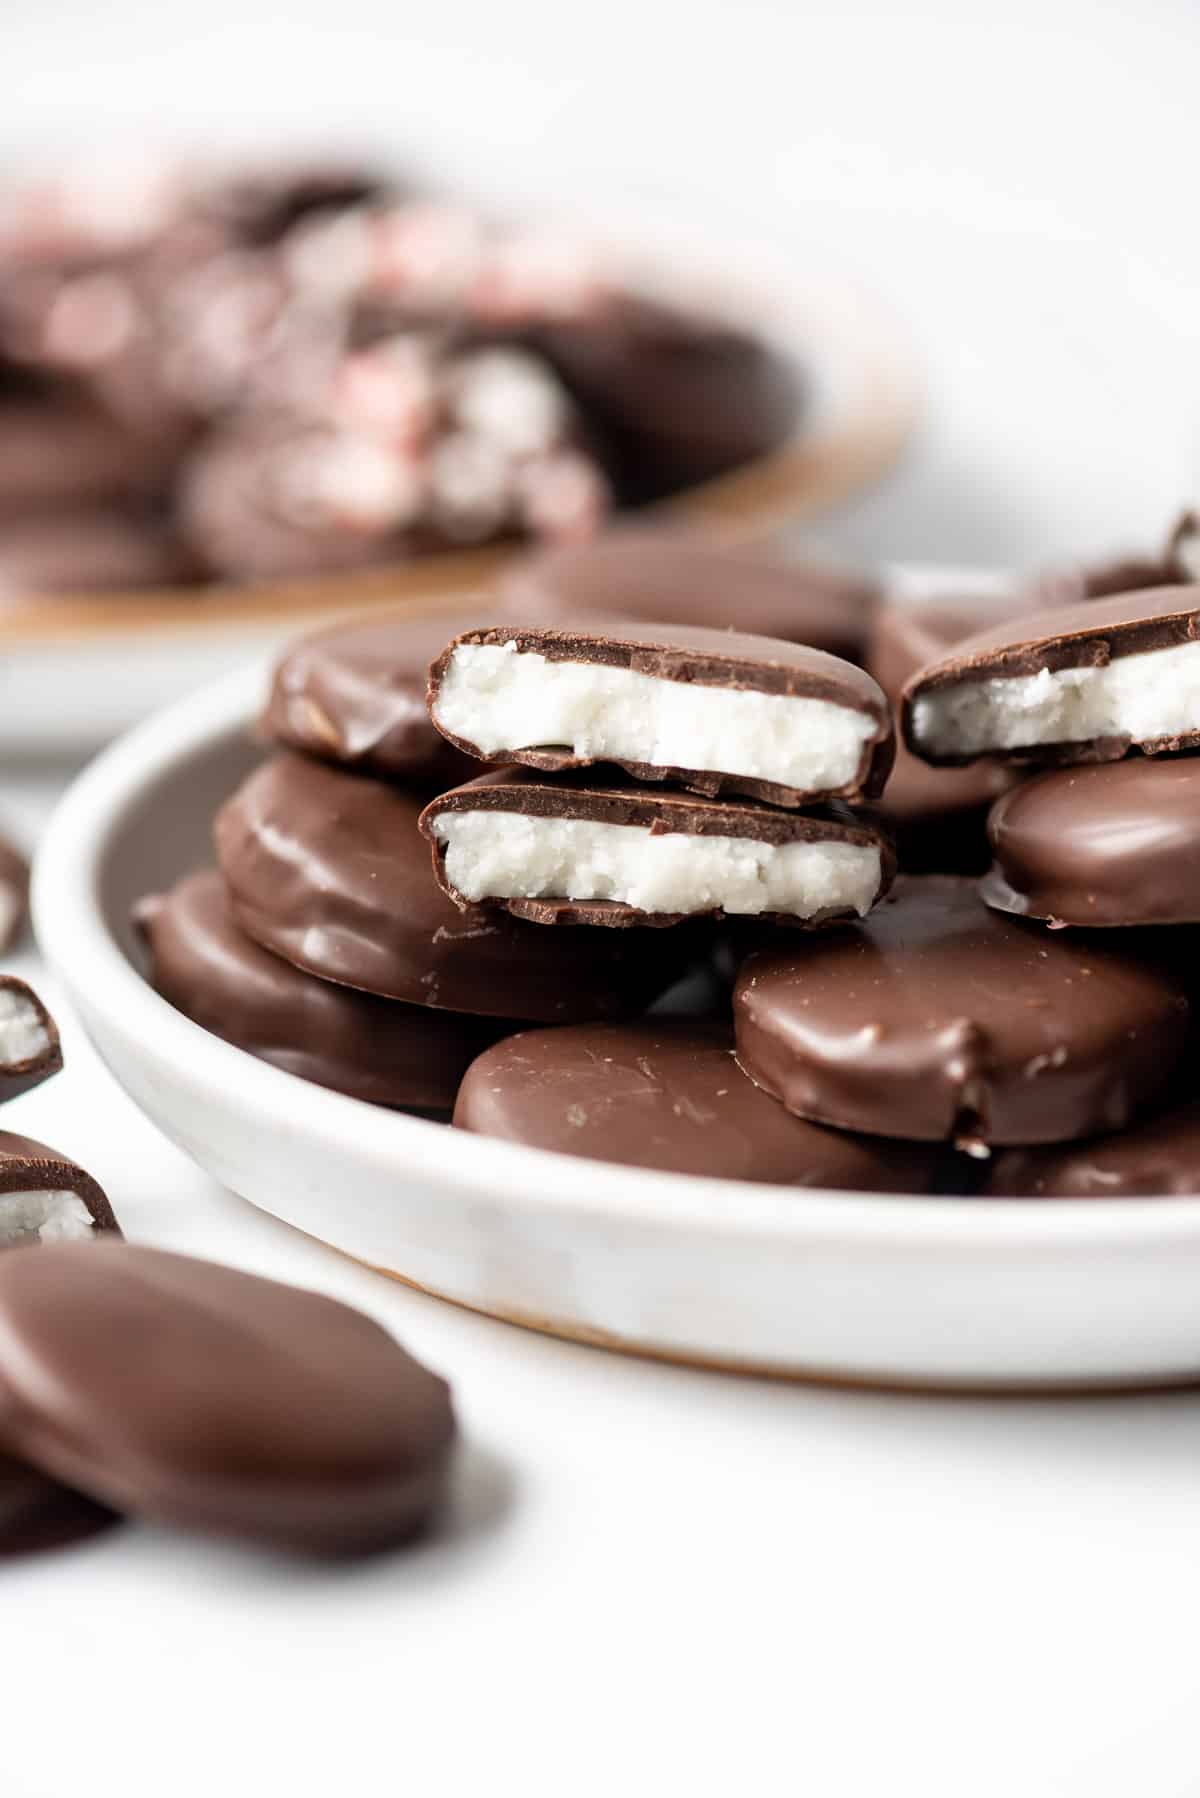 A homemade peppermint patty broken in half to reveal the creamy white mint interior.